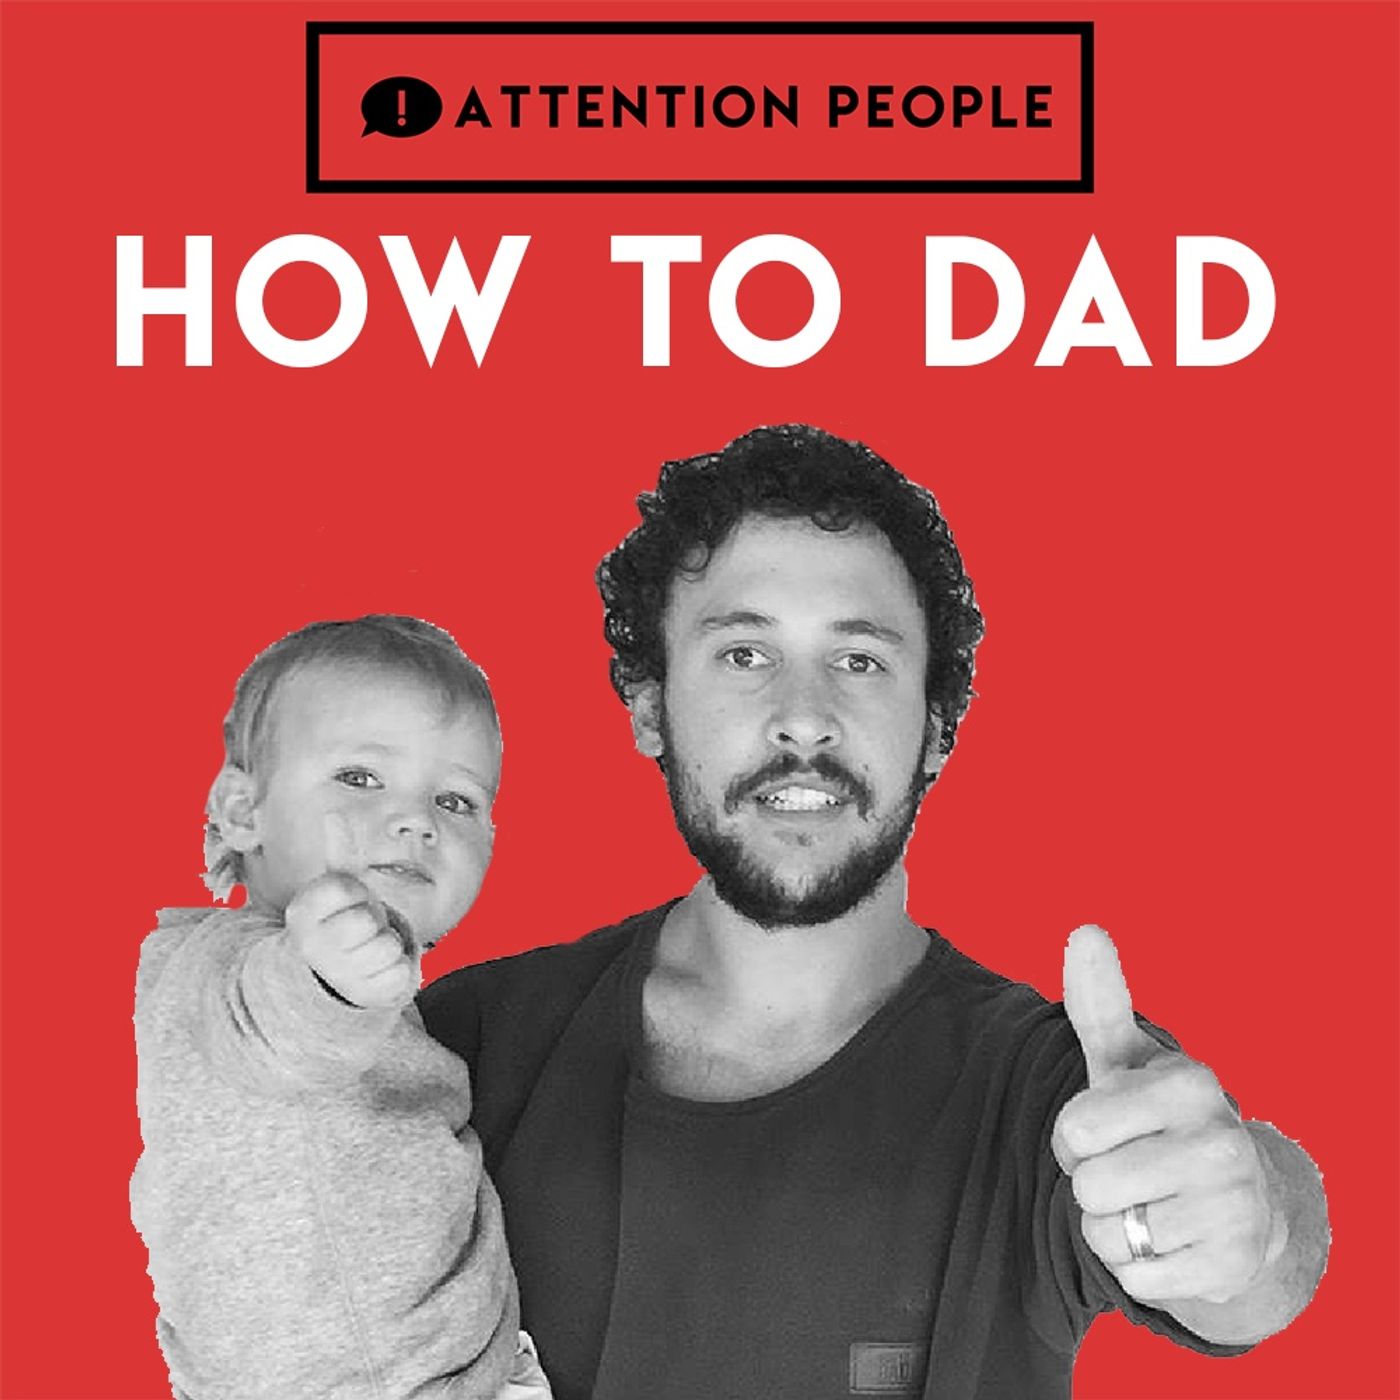 How To DAD - Facebook VS YouTube & The Viral Blueprint